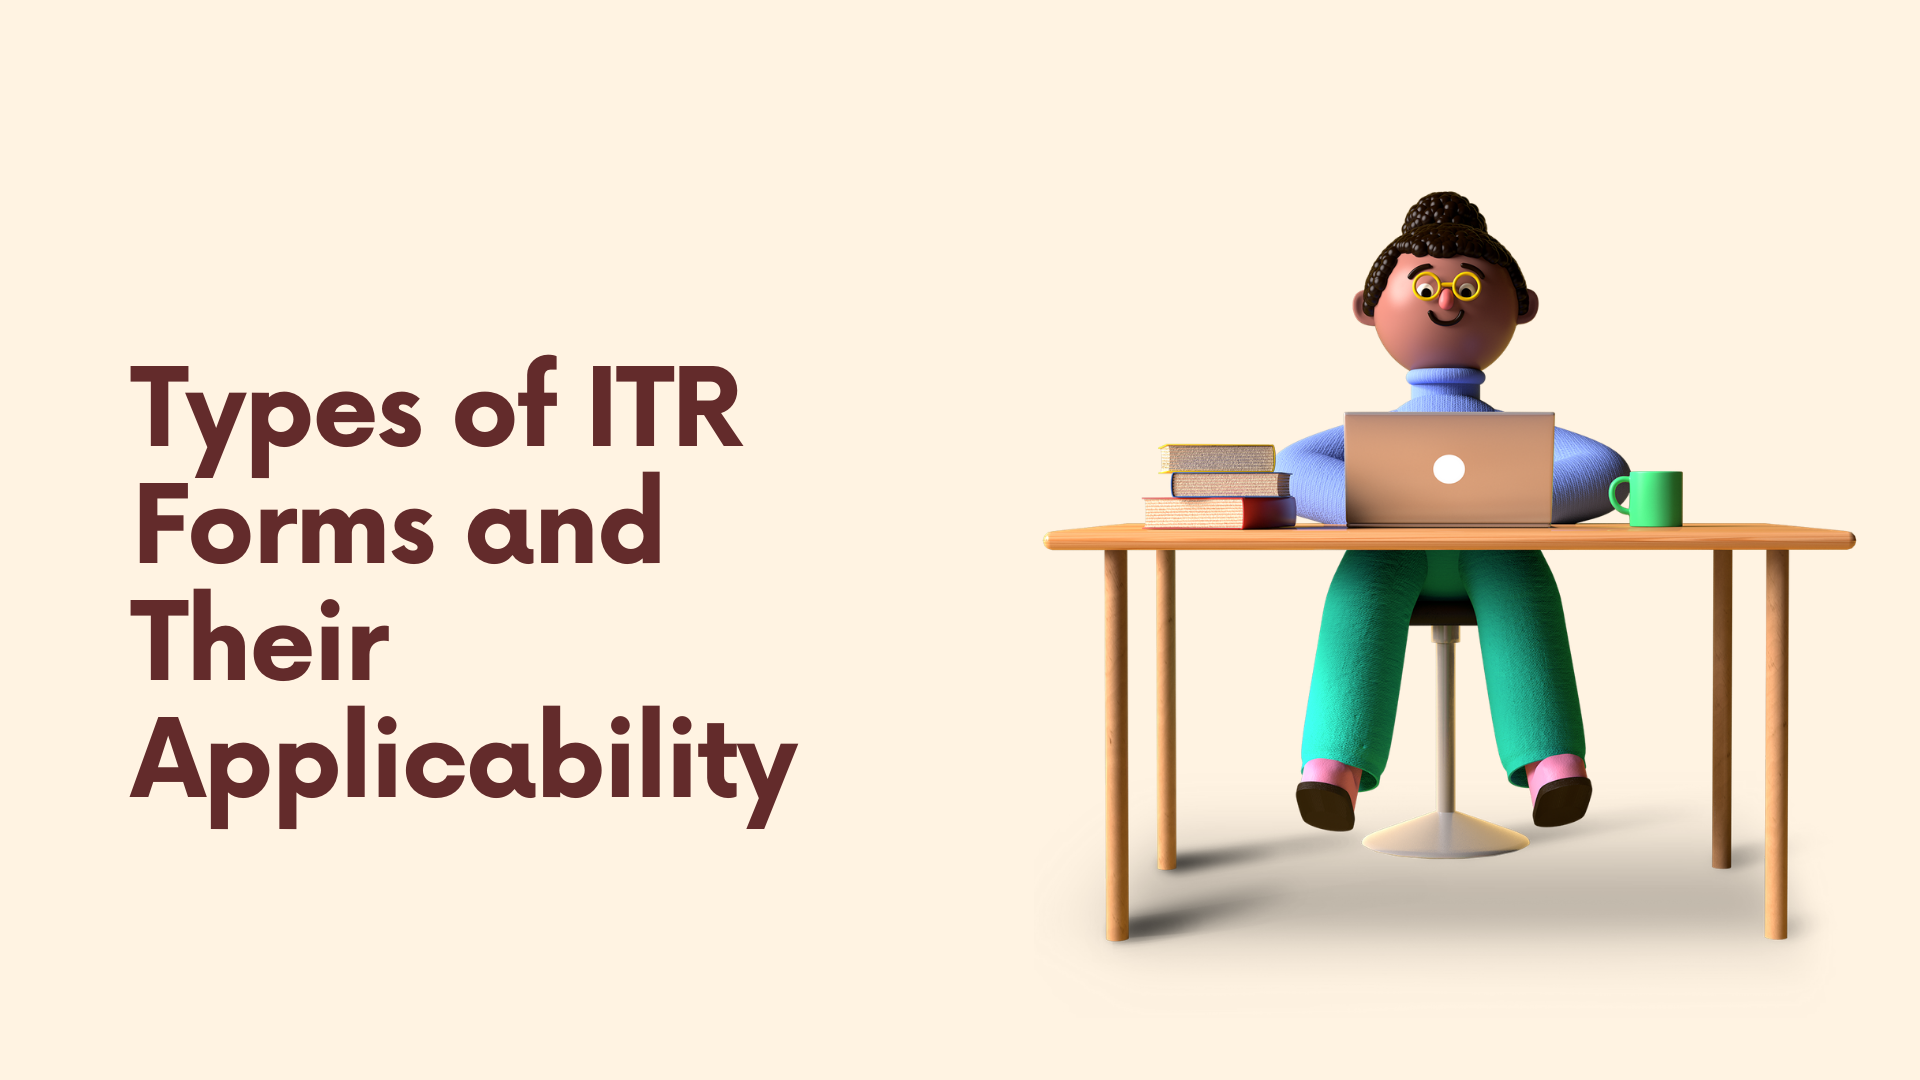 Types of ITR Form